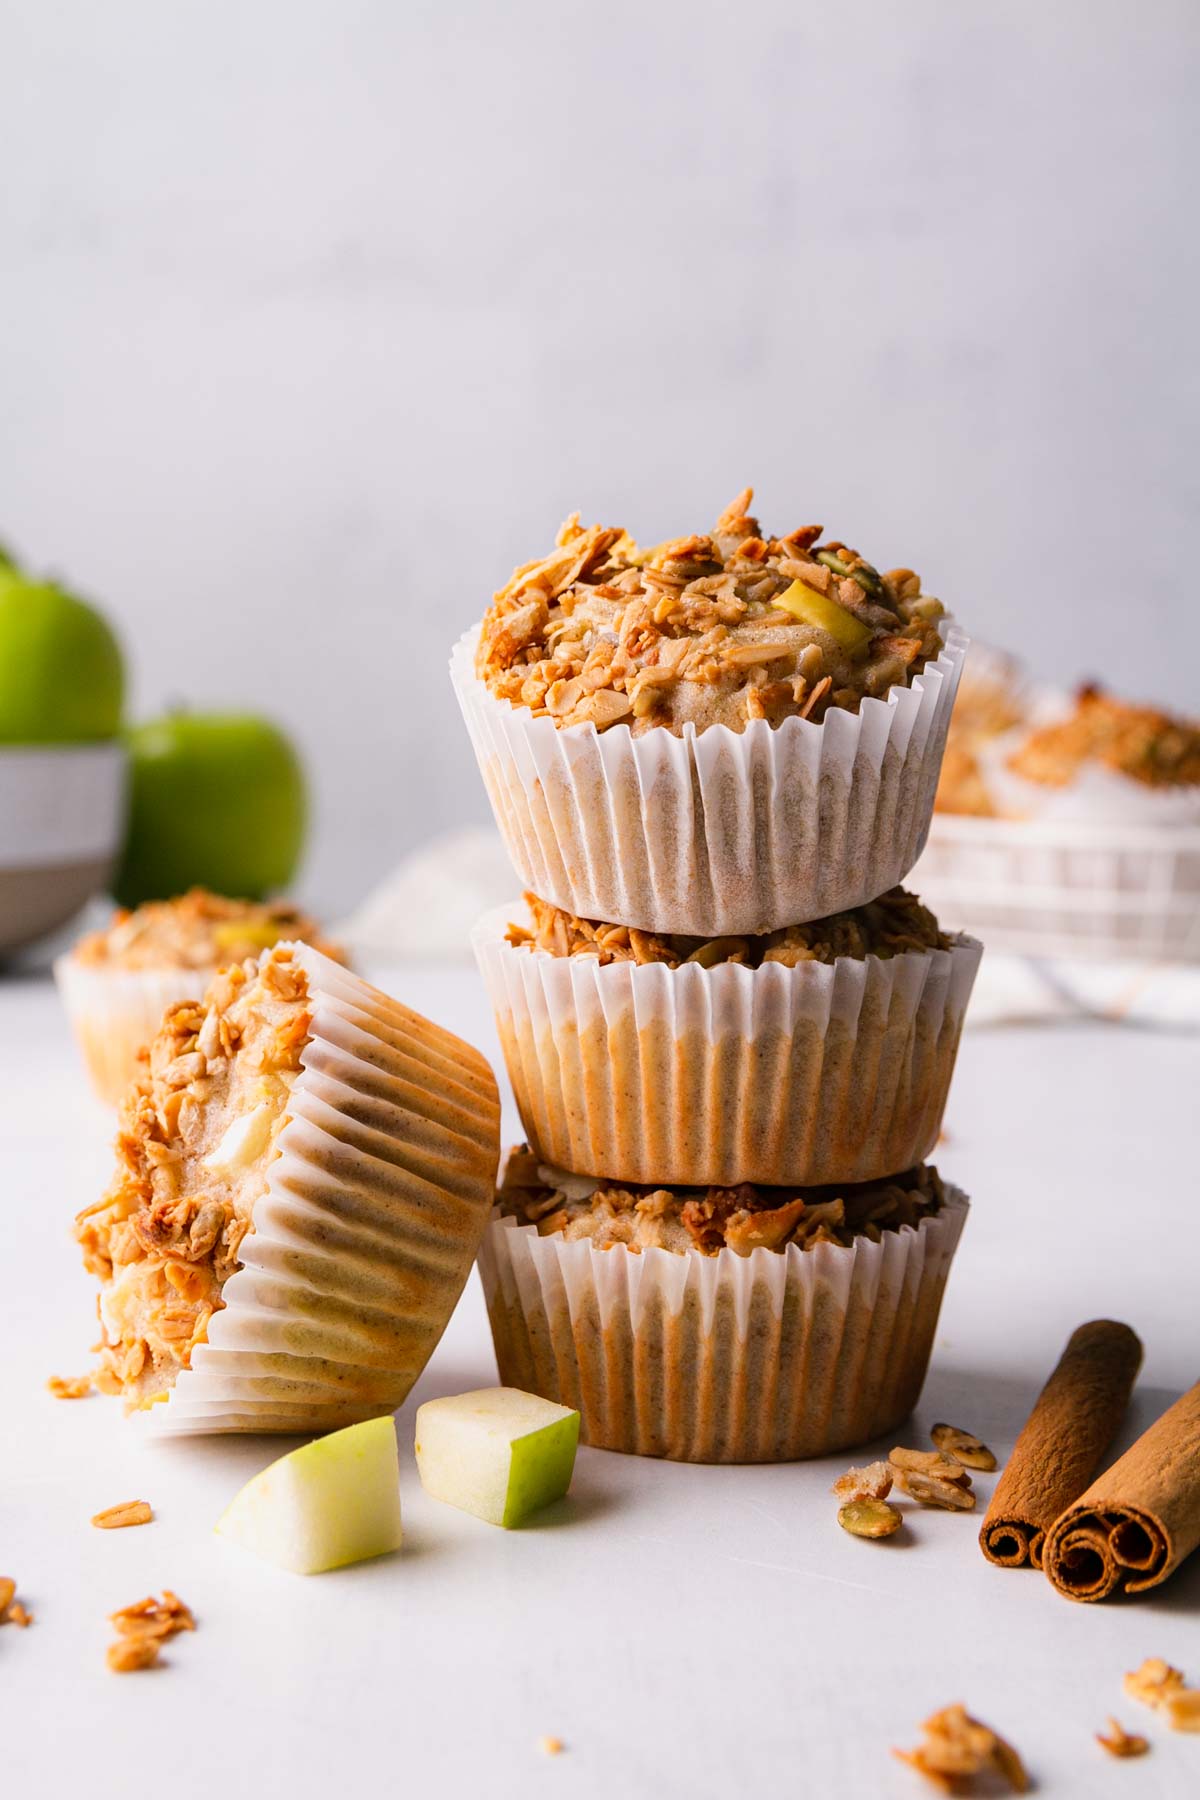 A stack of three gluten-free apple granola muffins with one more leaning on the side of the stack. Surrounded by diced apples and cinnamon sticks.